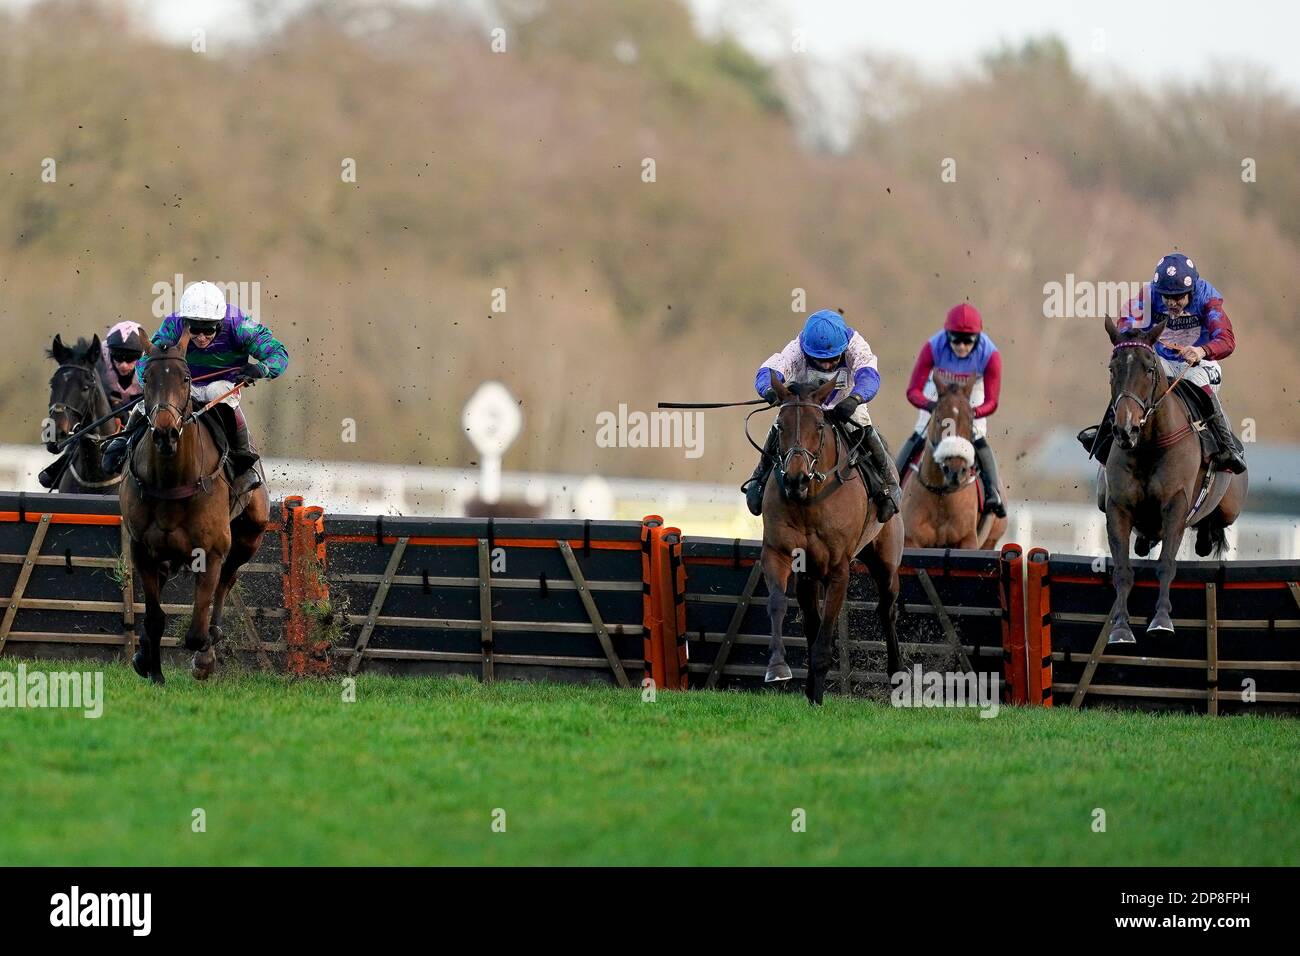 Aidan Coleman riding Paisley Park (right, spotted cap) clear the last to win The Porsche Long Walk Hurdle from Richard Johnson and Thyme Hill (left, white cap) during the Saturday of the December Racing Weekend at Ascot Racecourse. Stock Photo